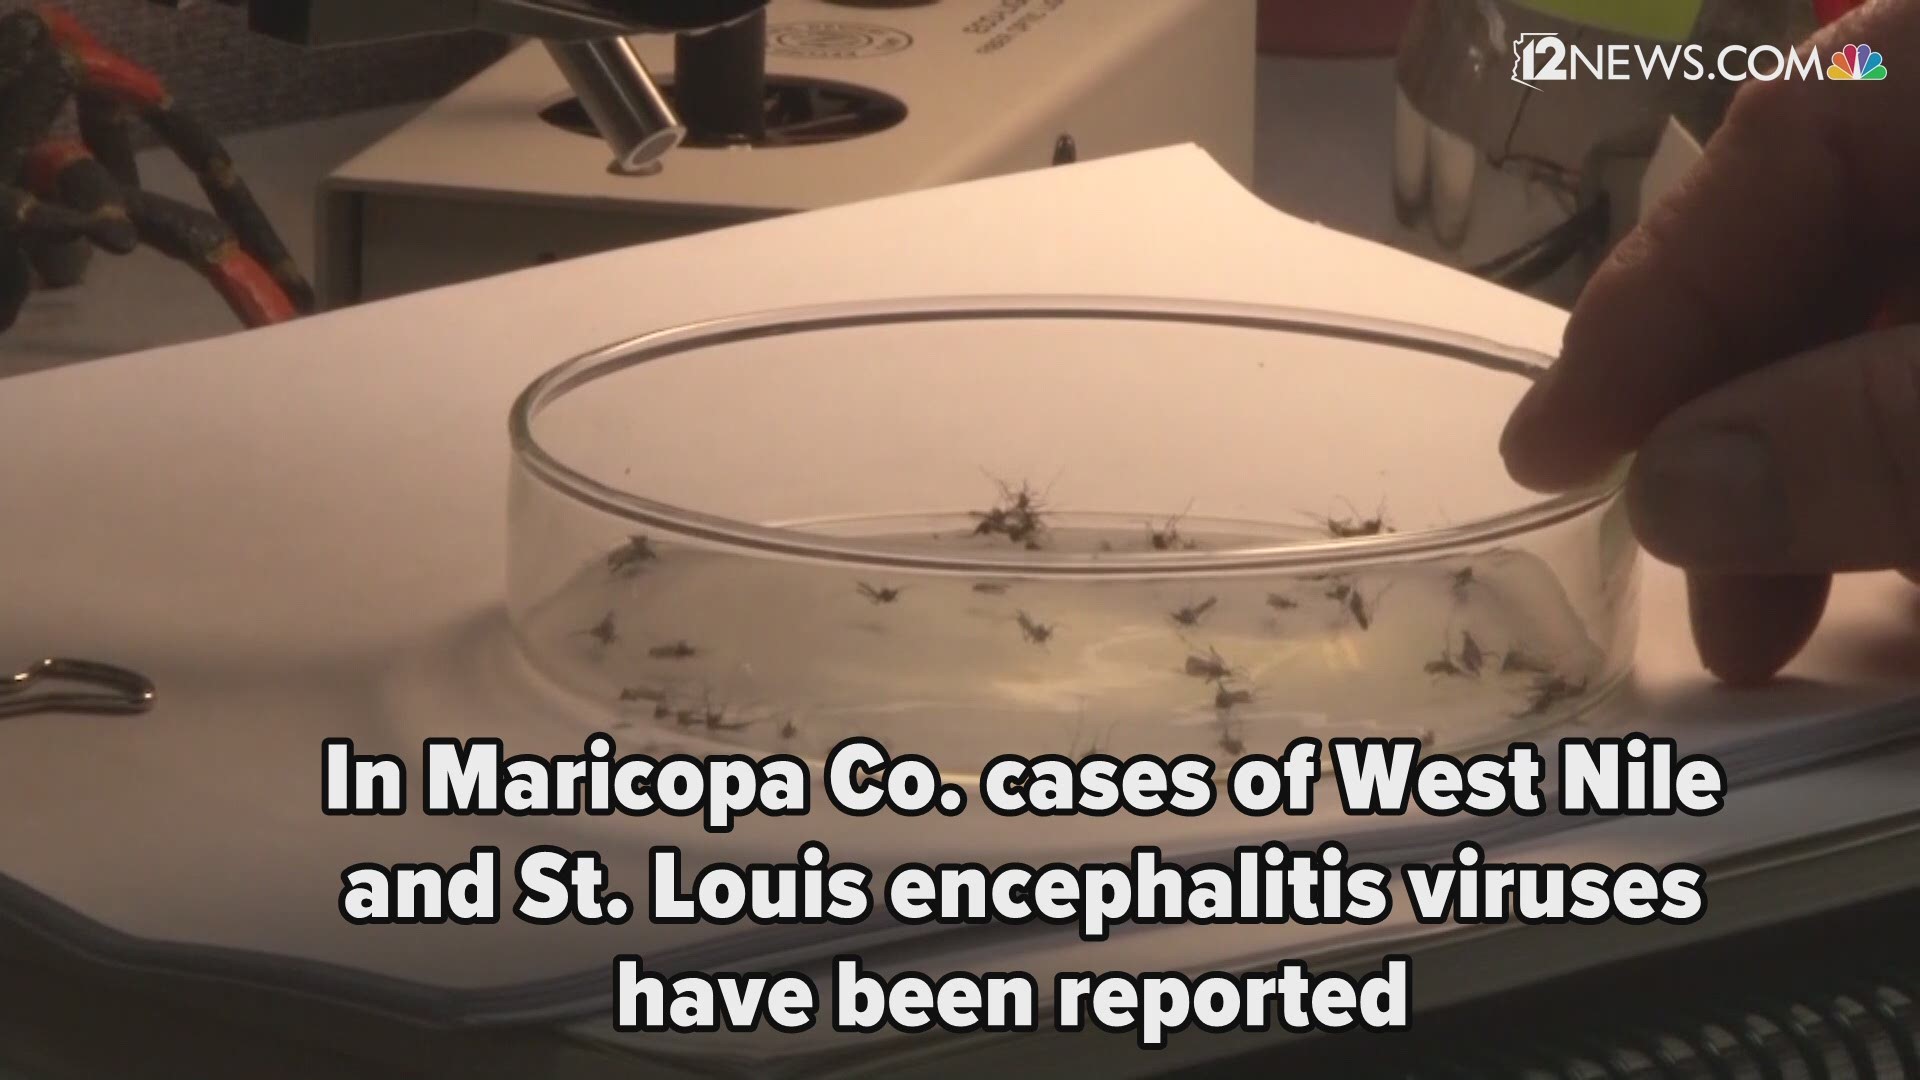 The Arizona Department of Game and Fish is reporting cases of West Nile virus and St. Louis encephalitis in Maricopa County. Here's what you need to know about both diseases.